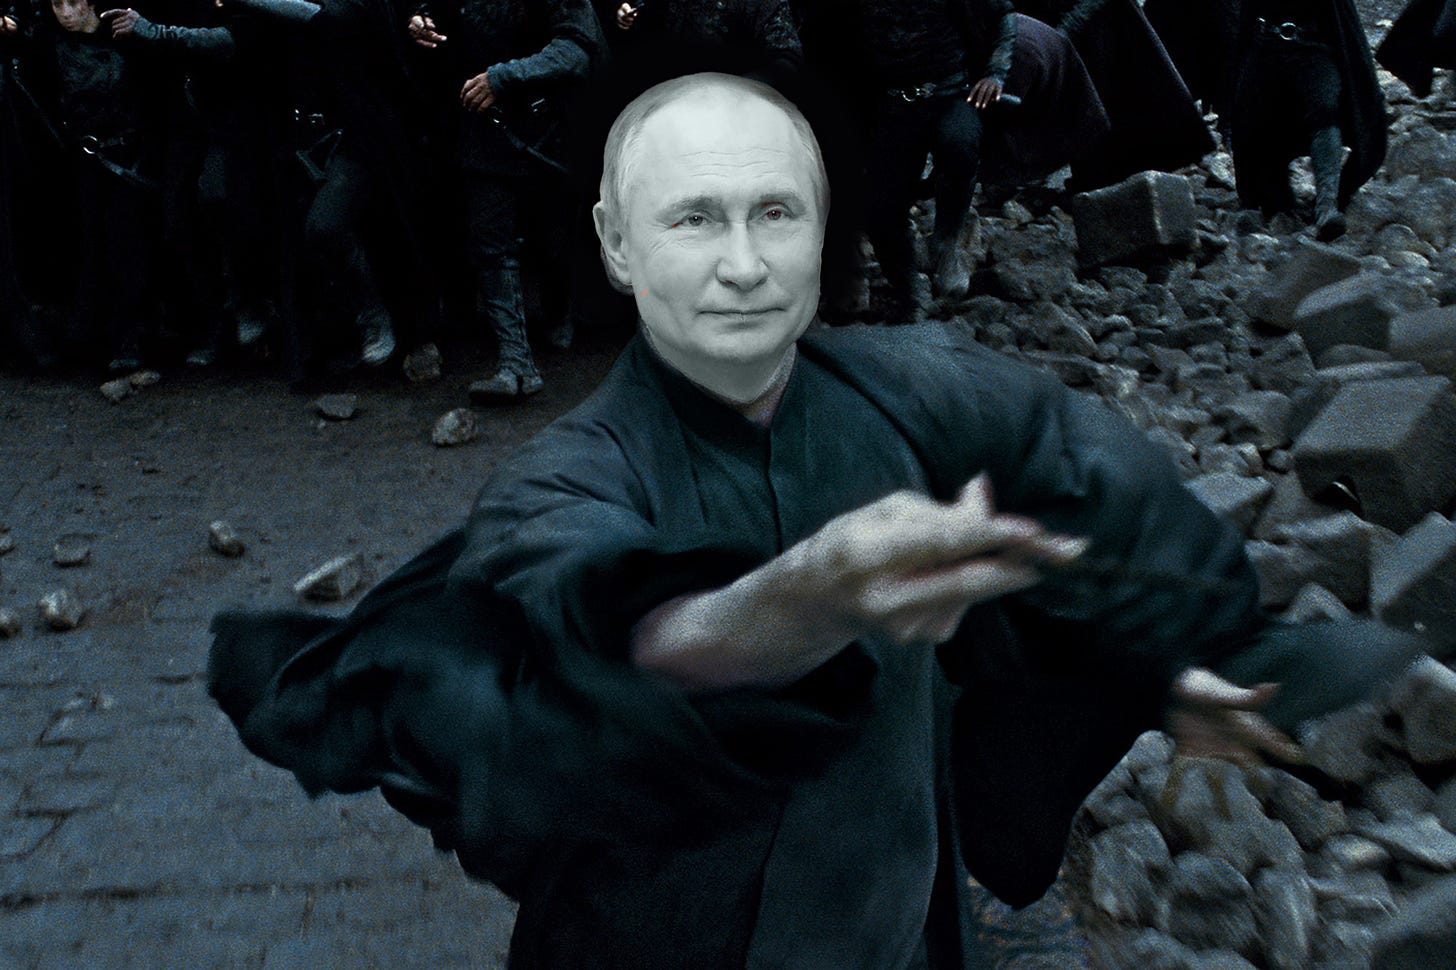 Vladimir Putin as Lord Voldemort from Harry Potter